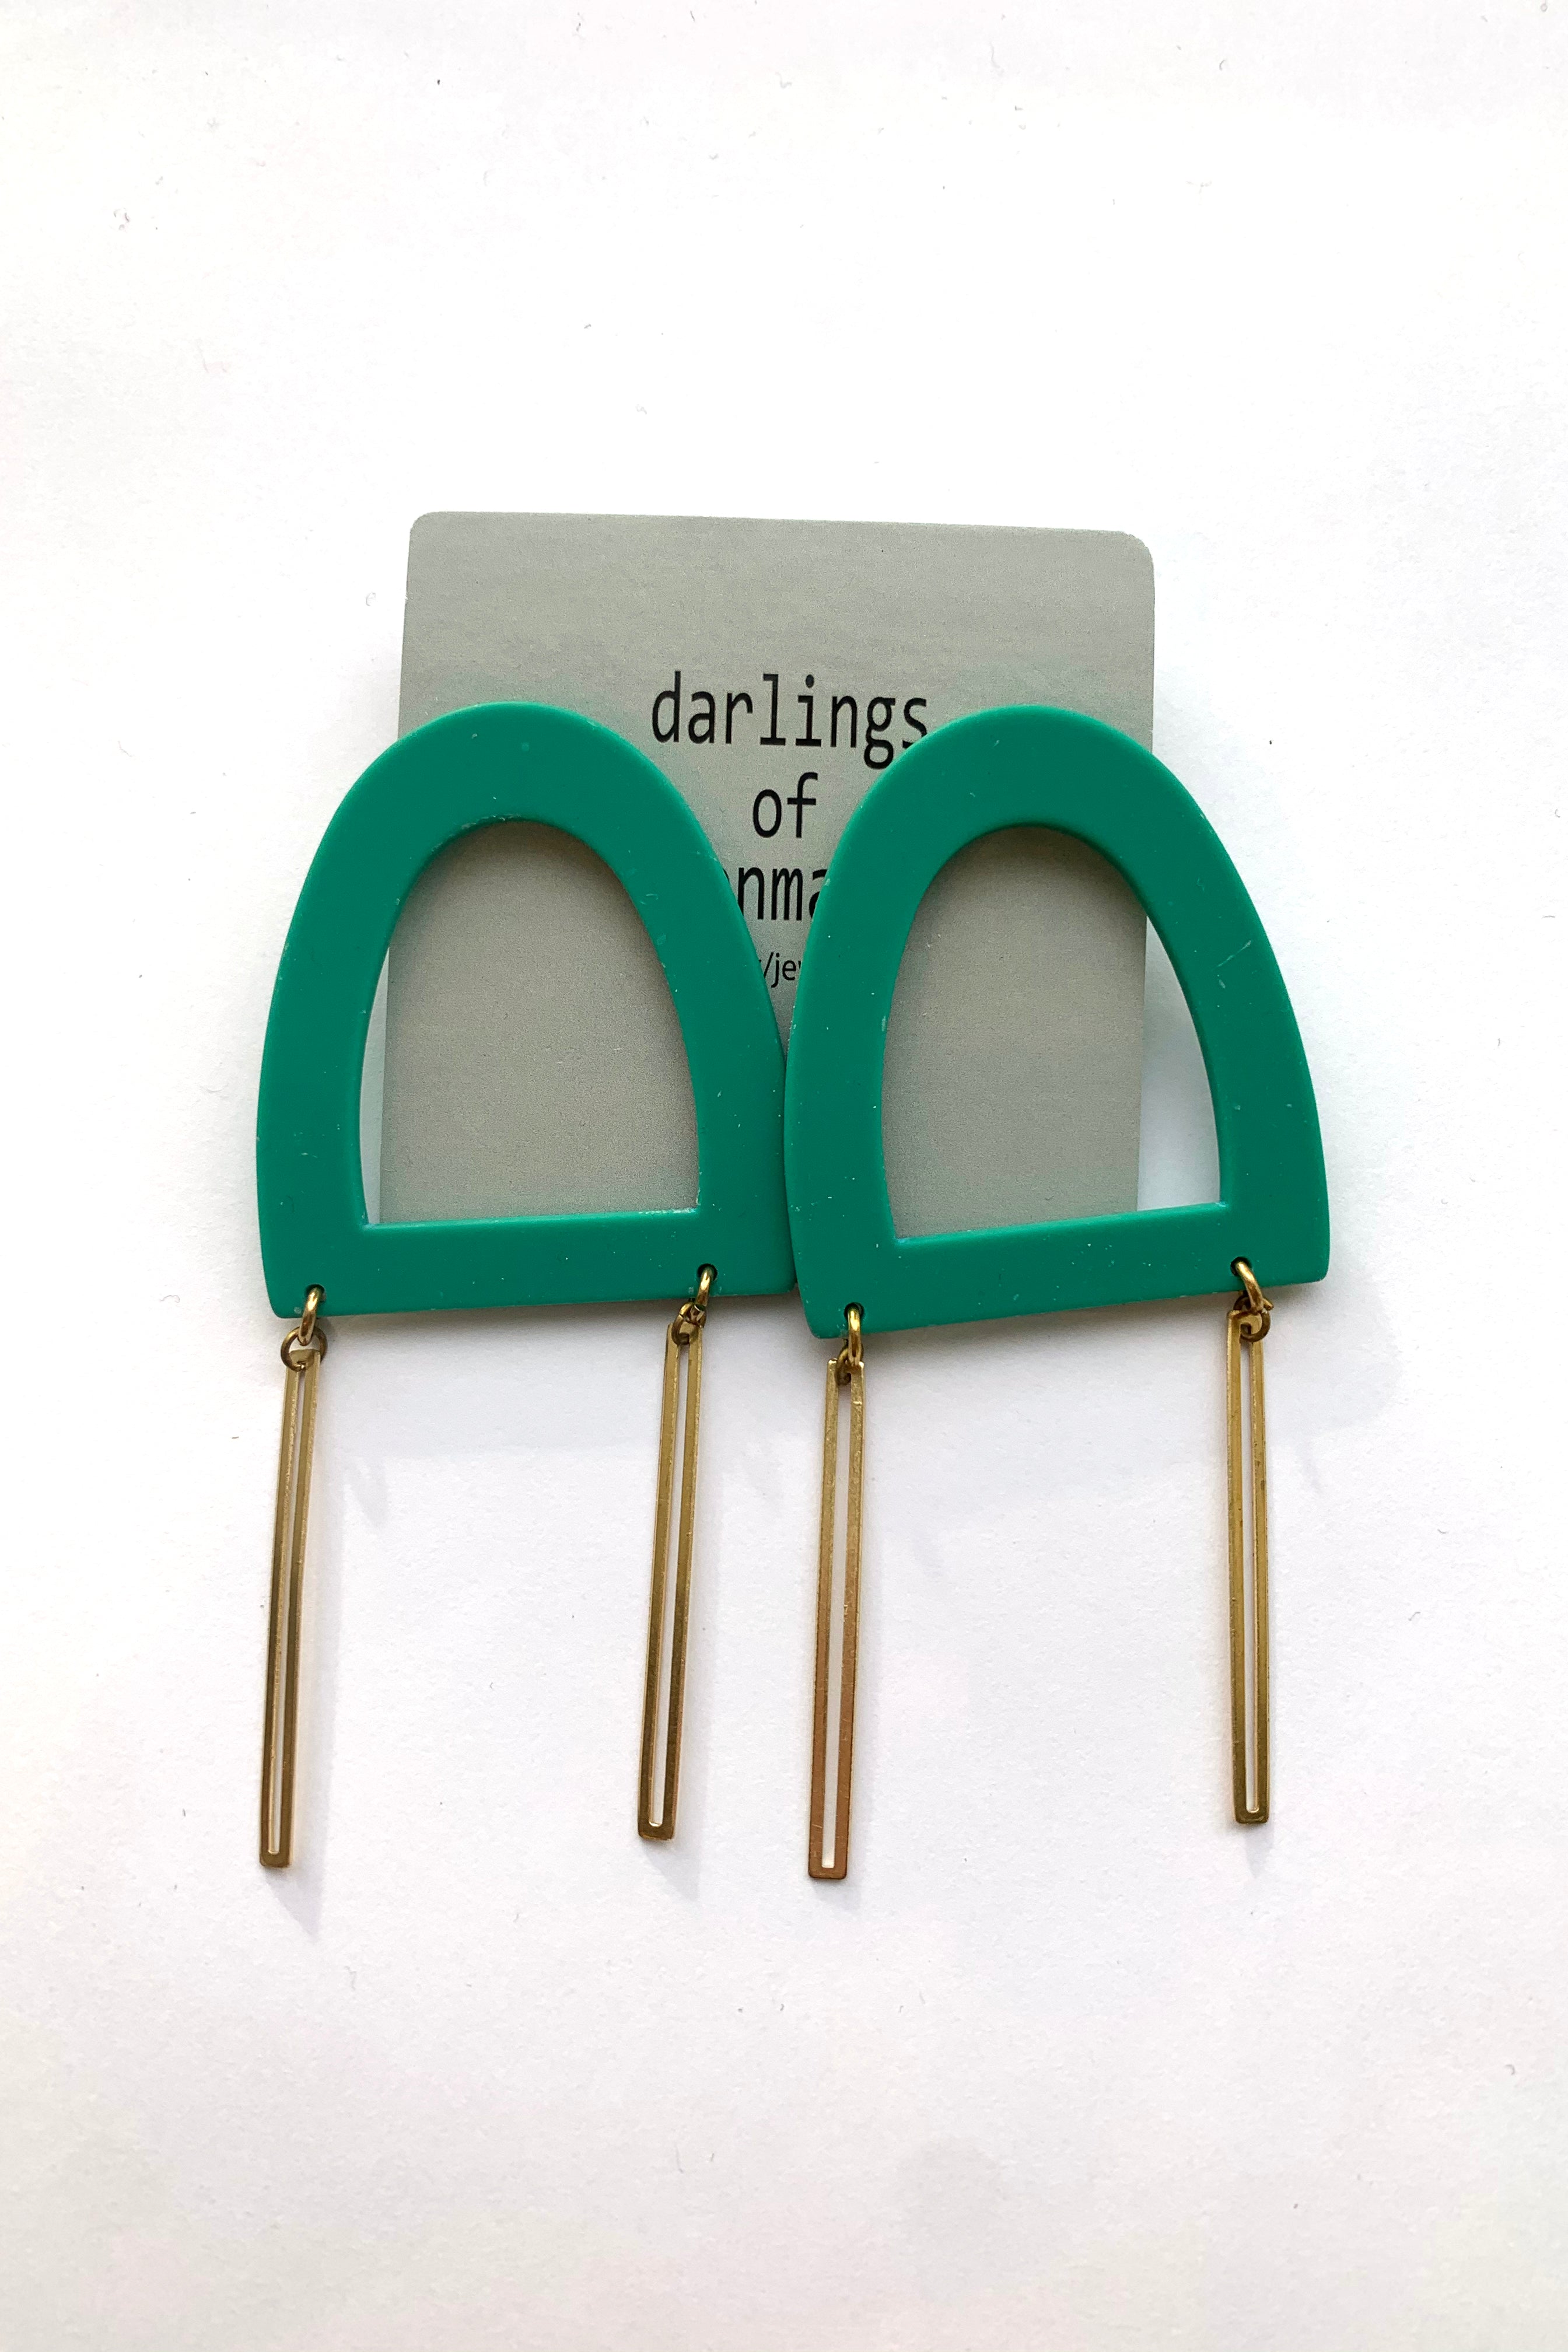 Lily earrings by Darlings of Denmark; large stud earrings with hollowed, acrylic, emerald geometric shape, and dangling raw brass sticks; flat lay